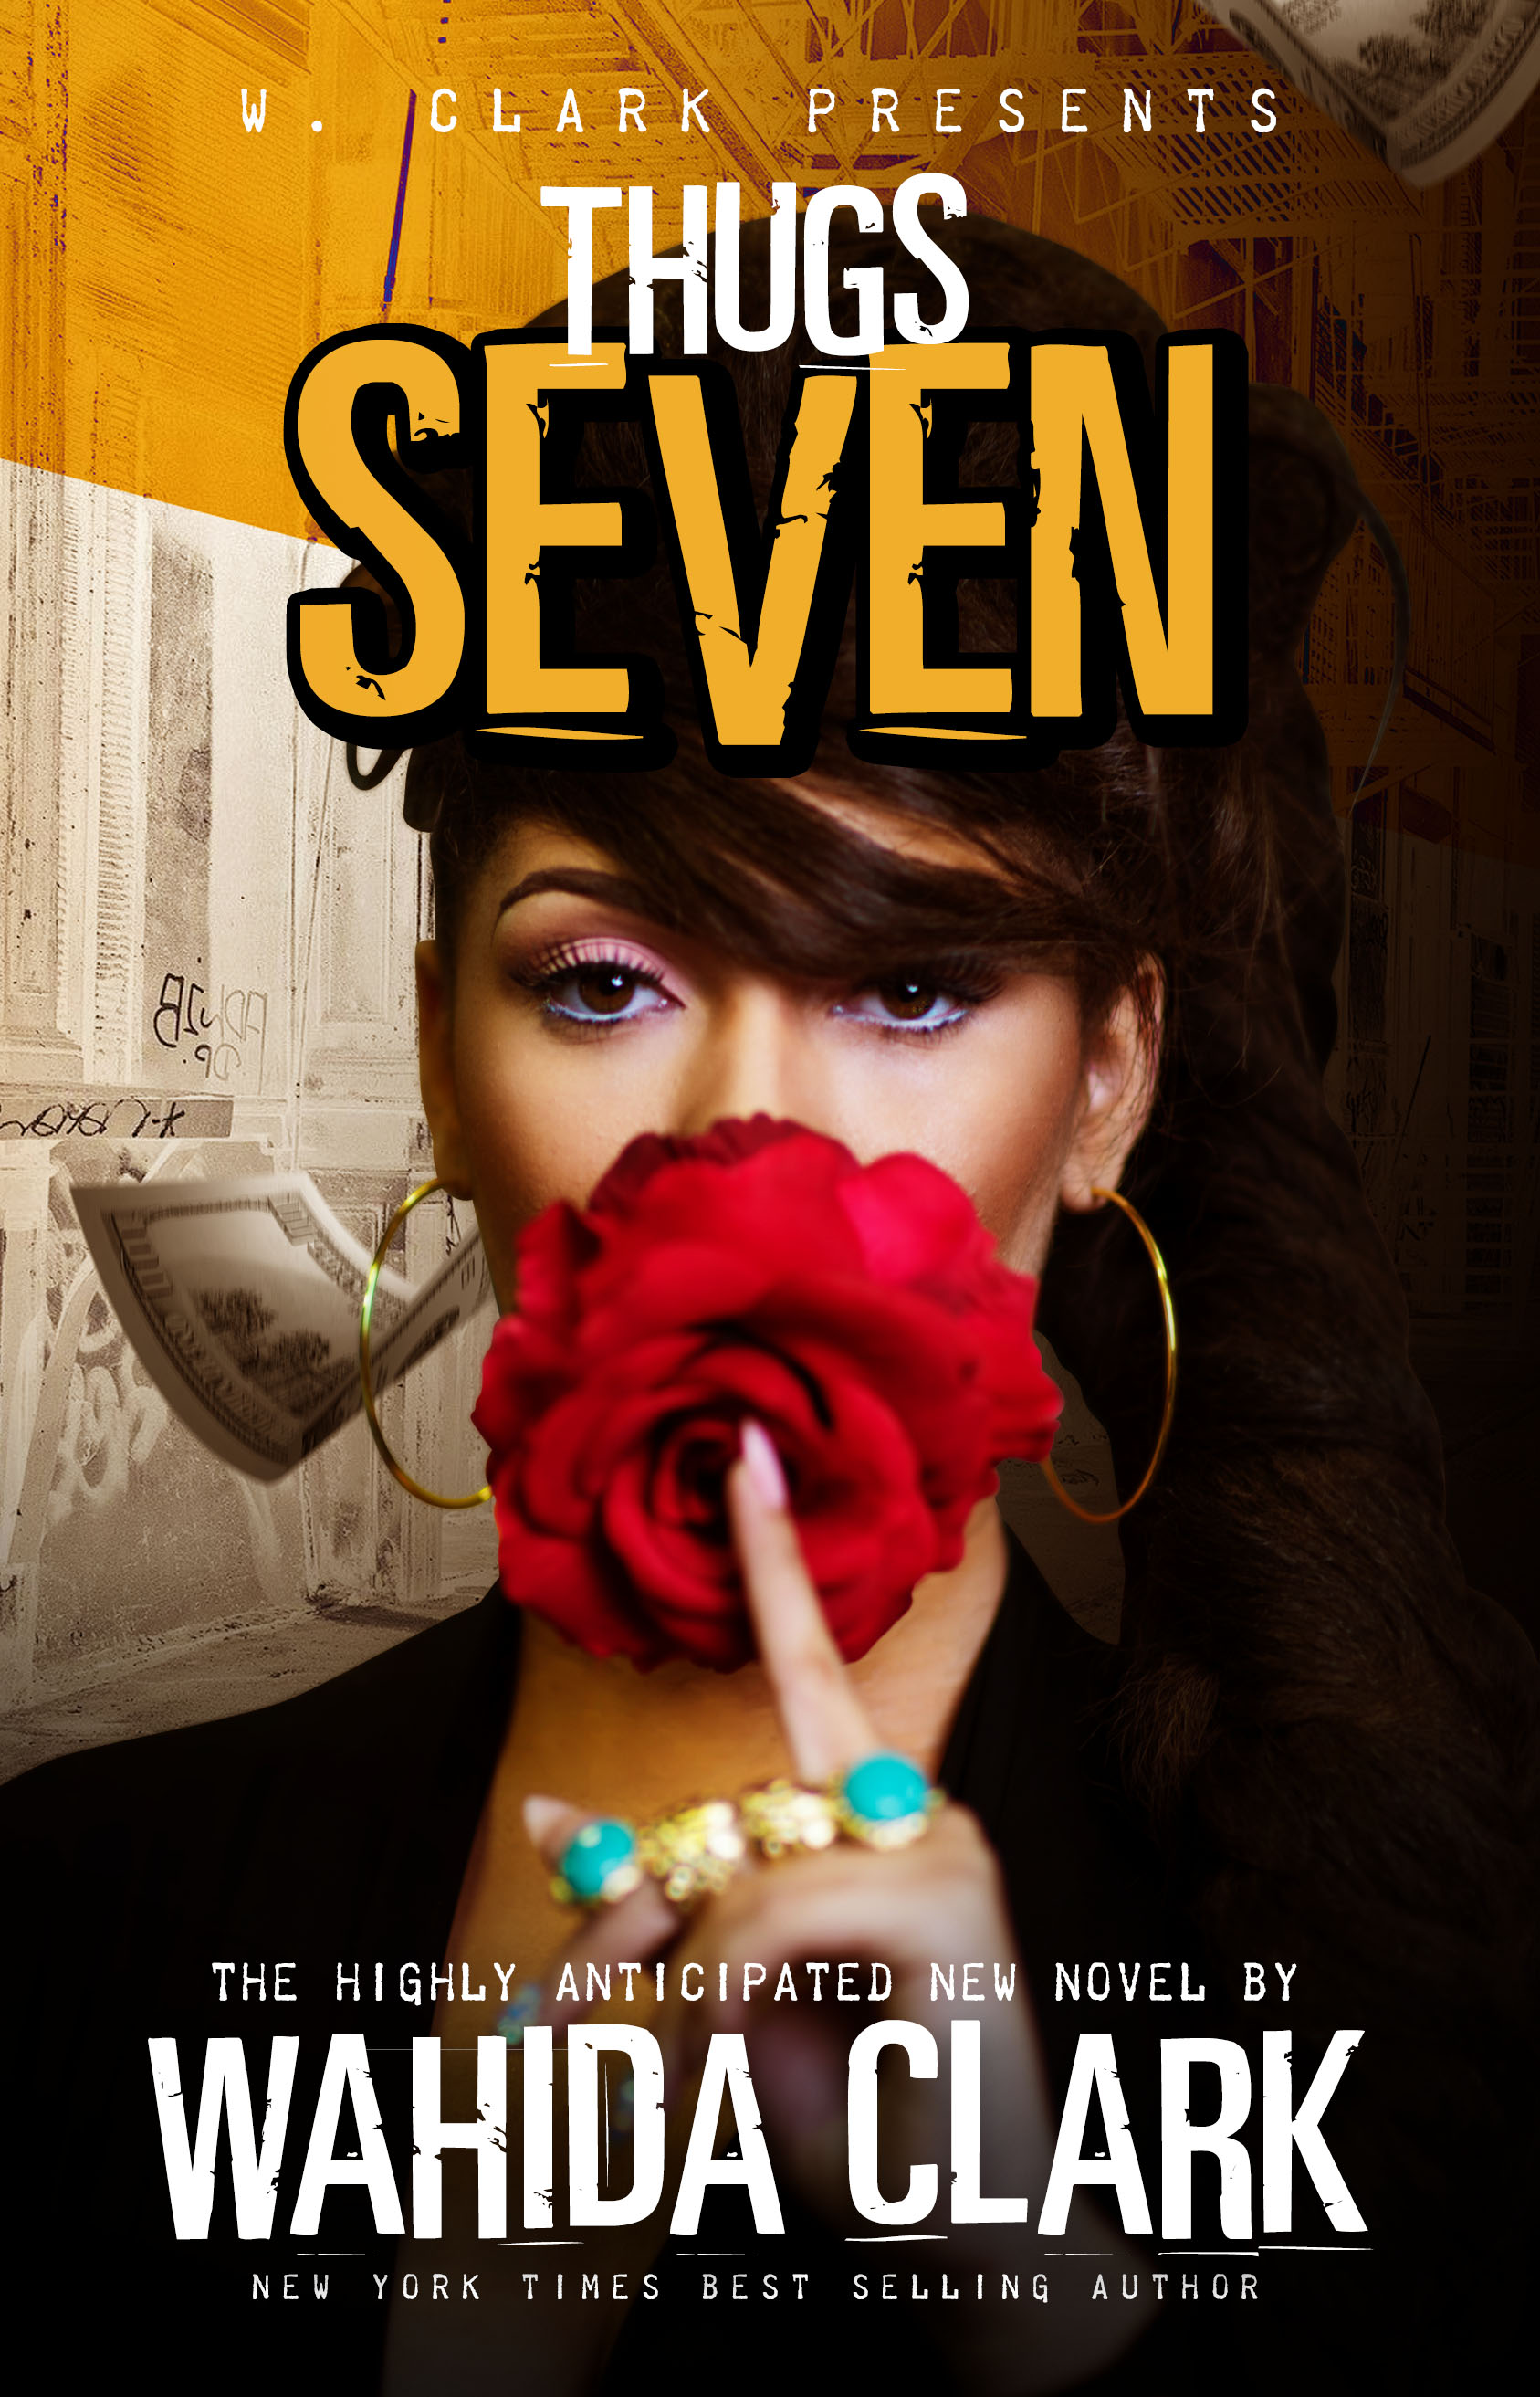 Thugs: Seven by Wahida Clark - Book Cover